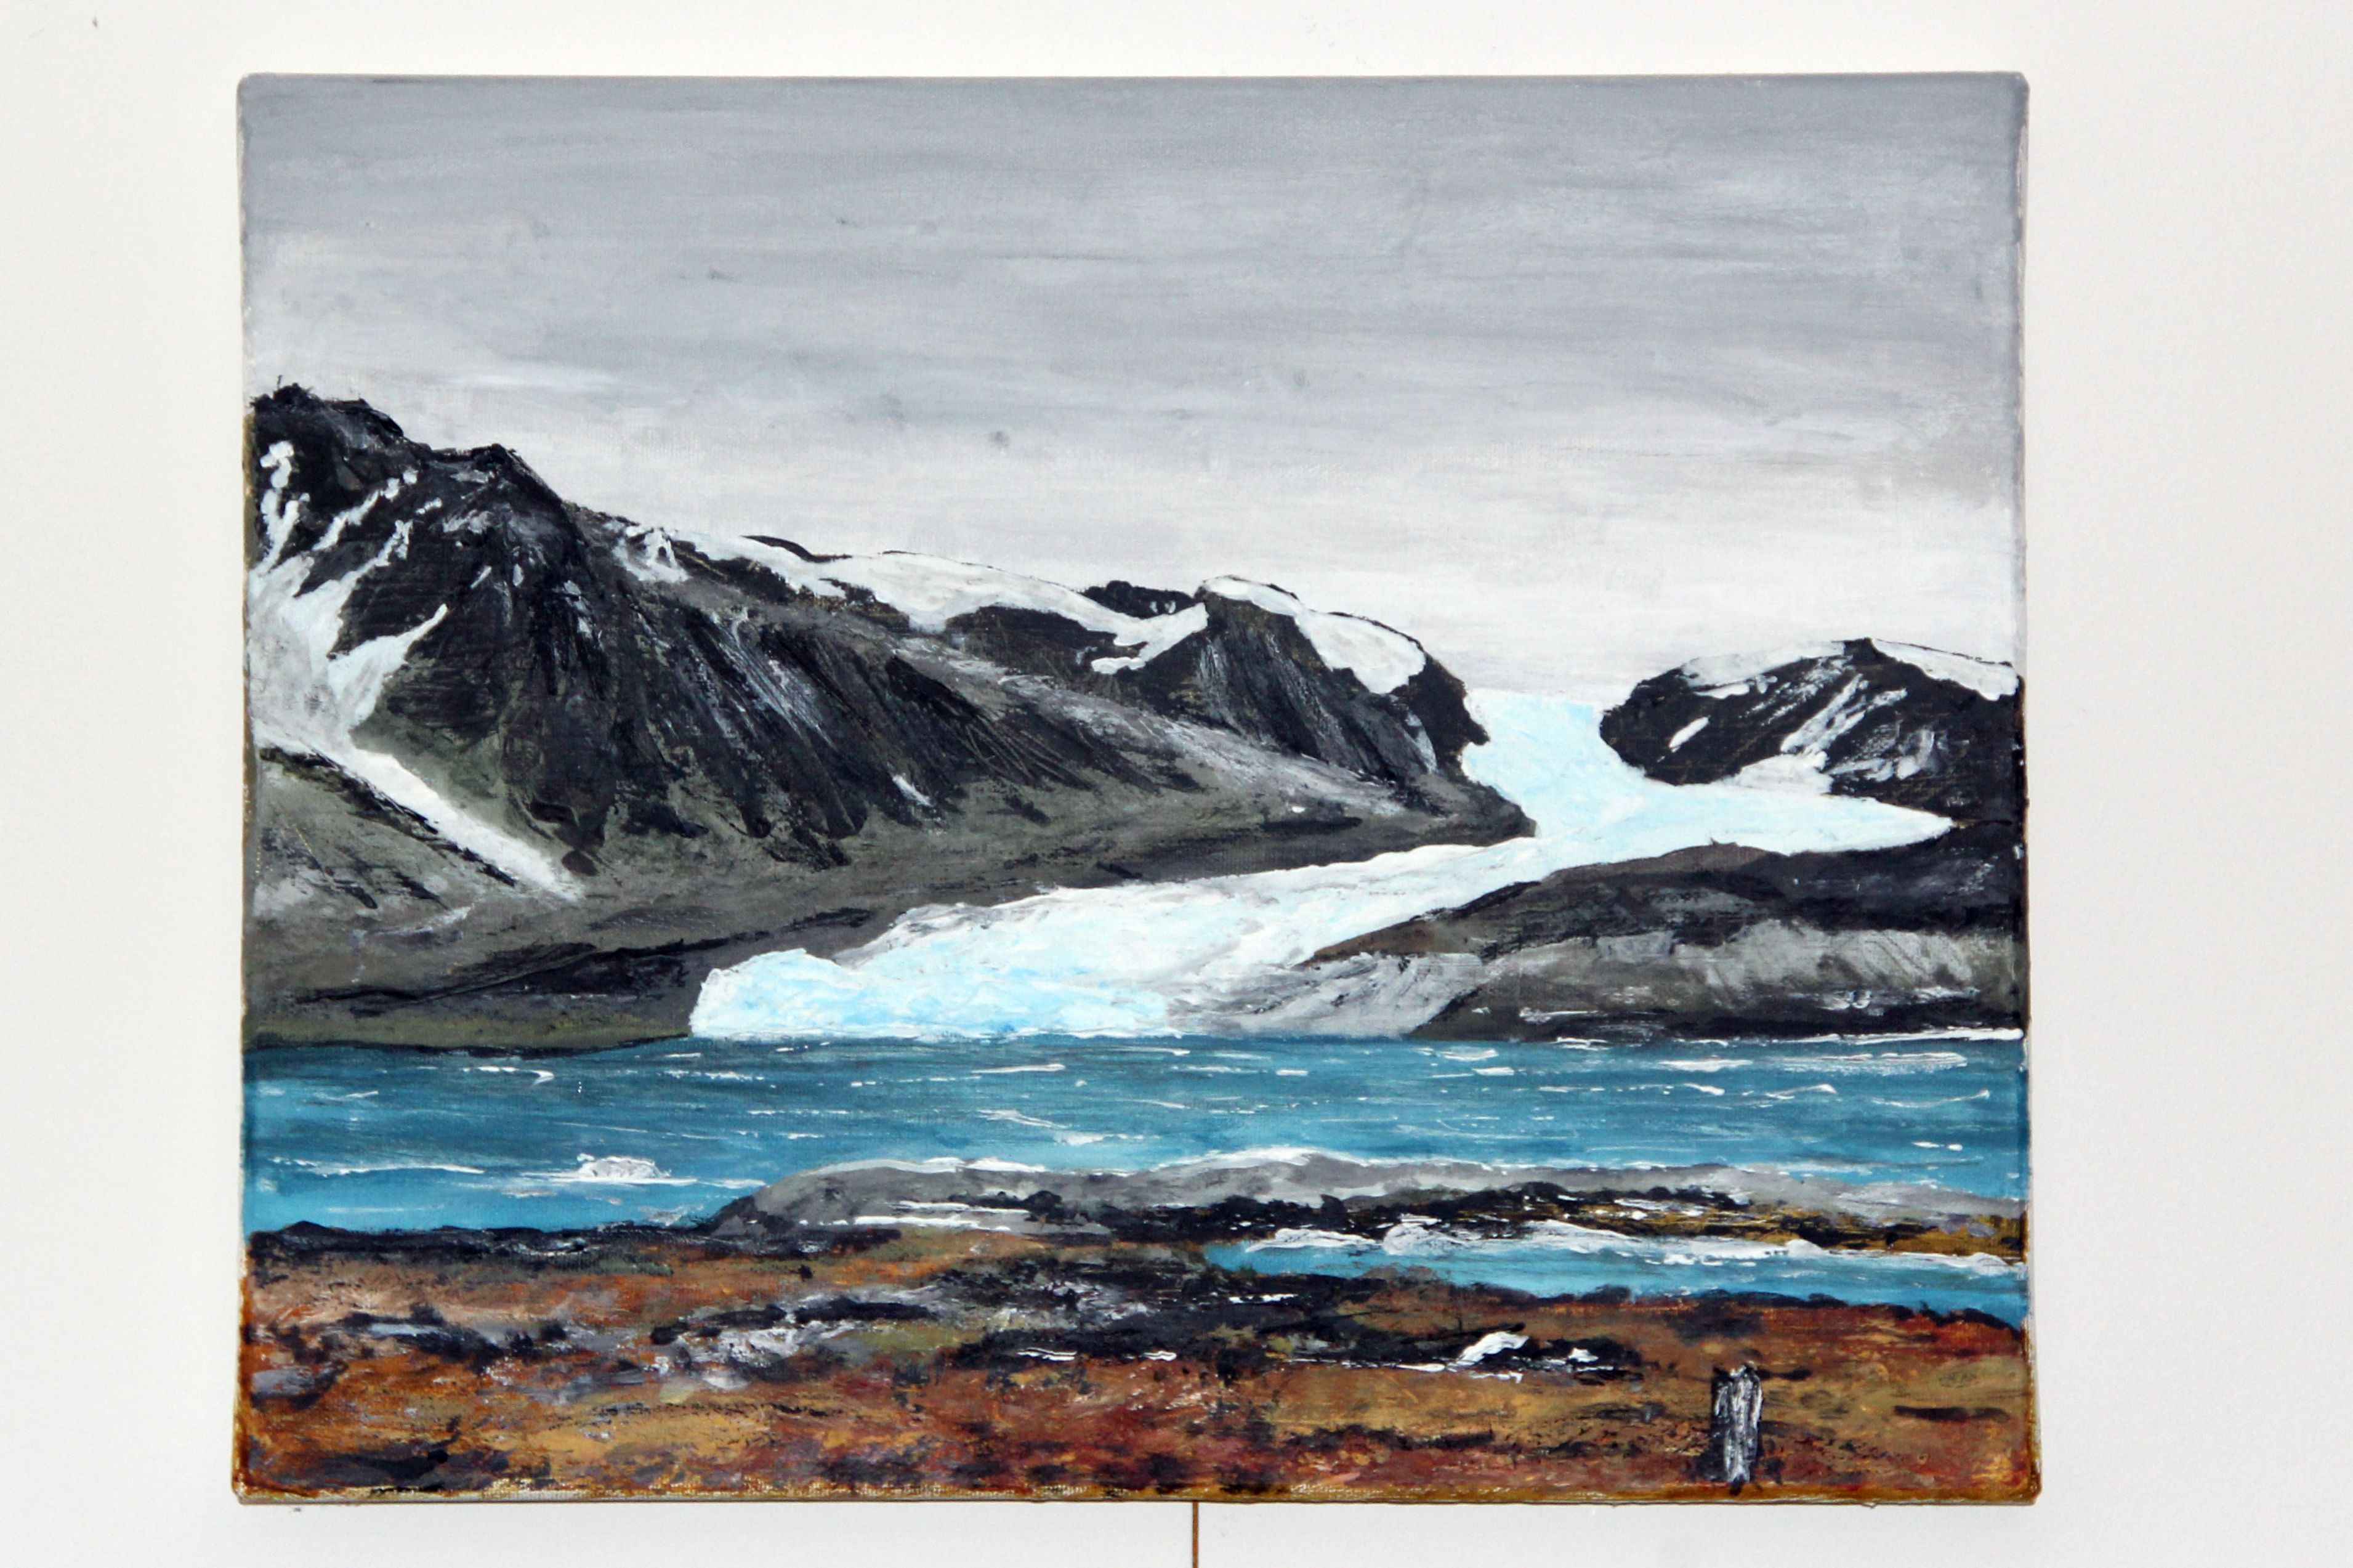 Conwaybreen, Svalbard on a cold summer day, acrylic on canvas.